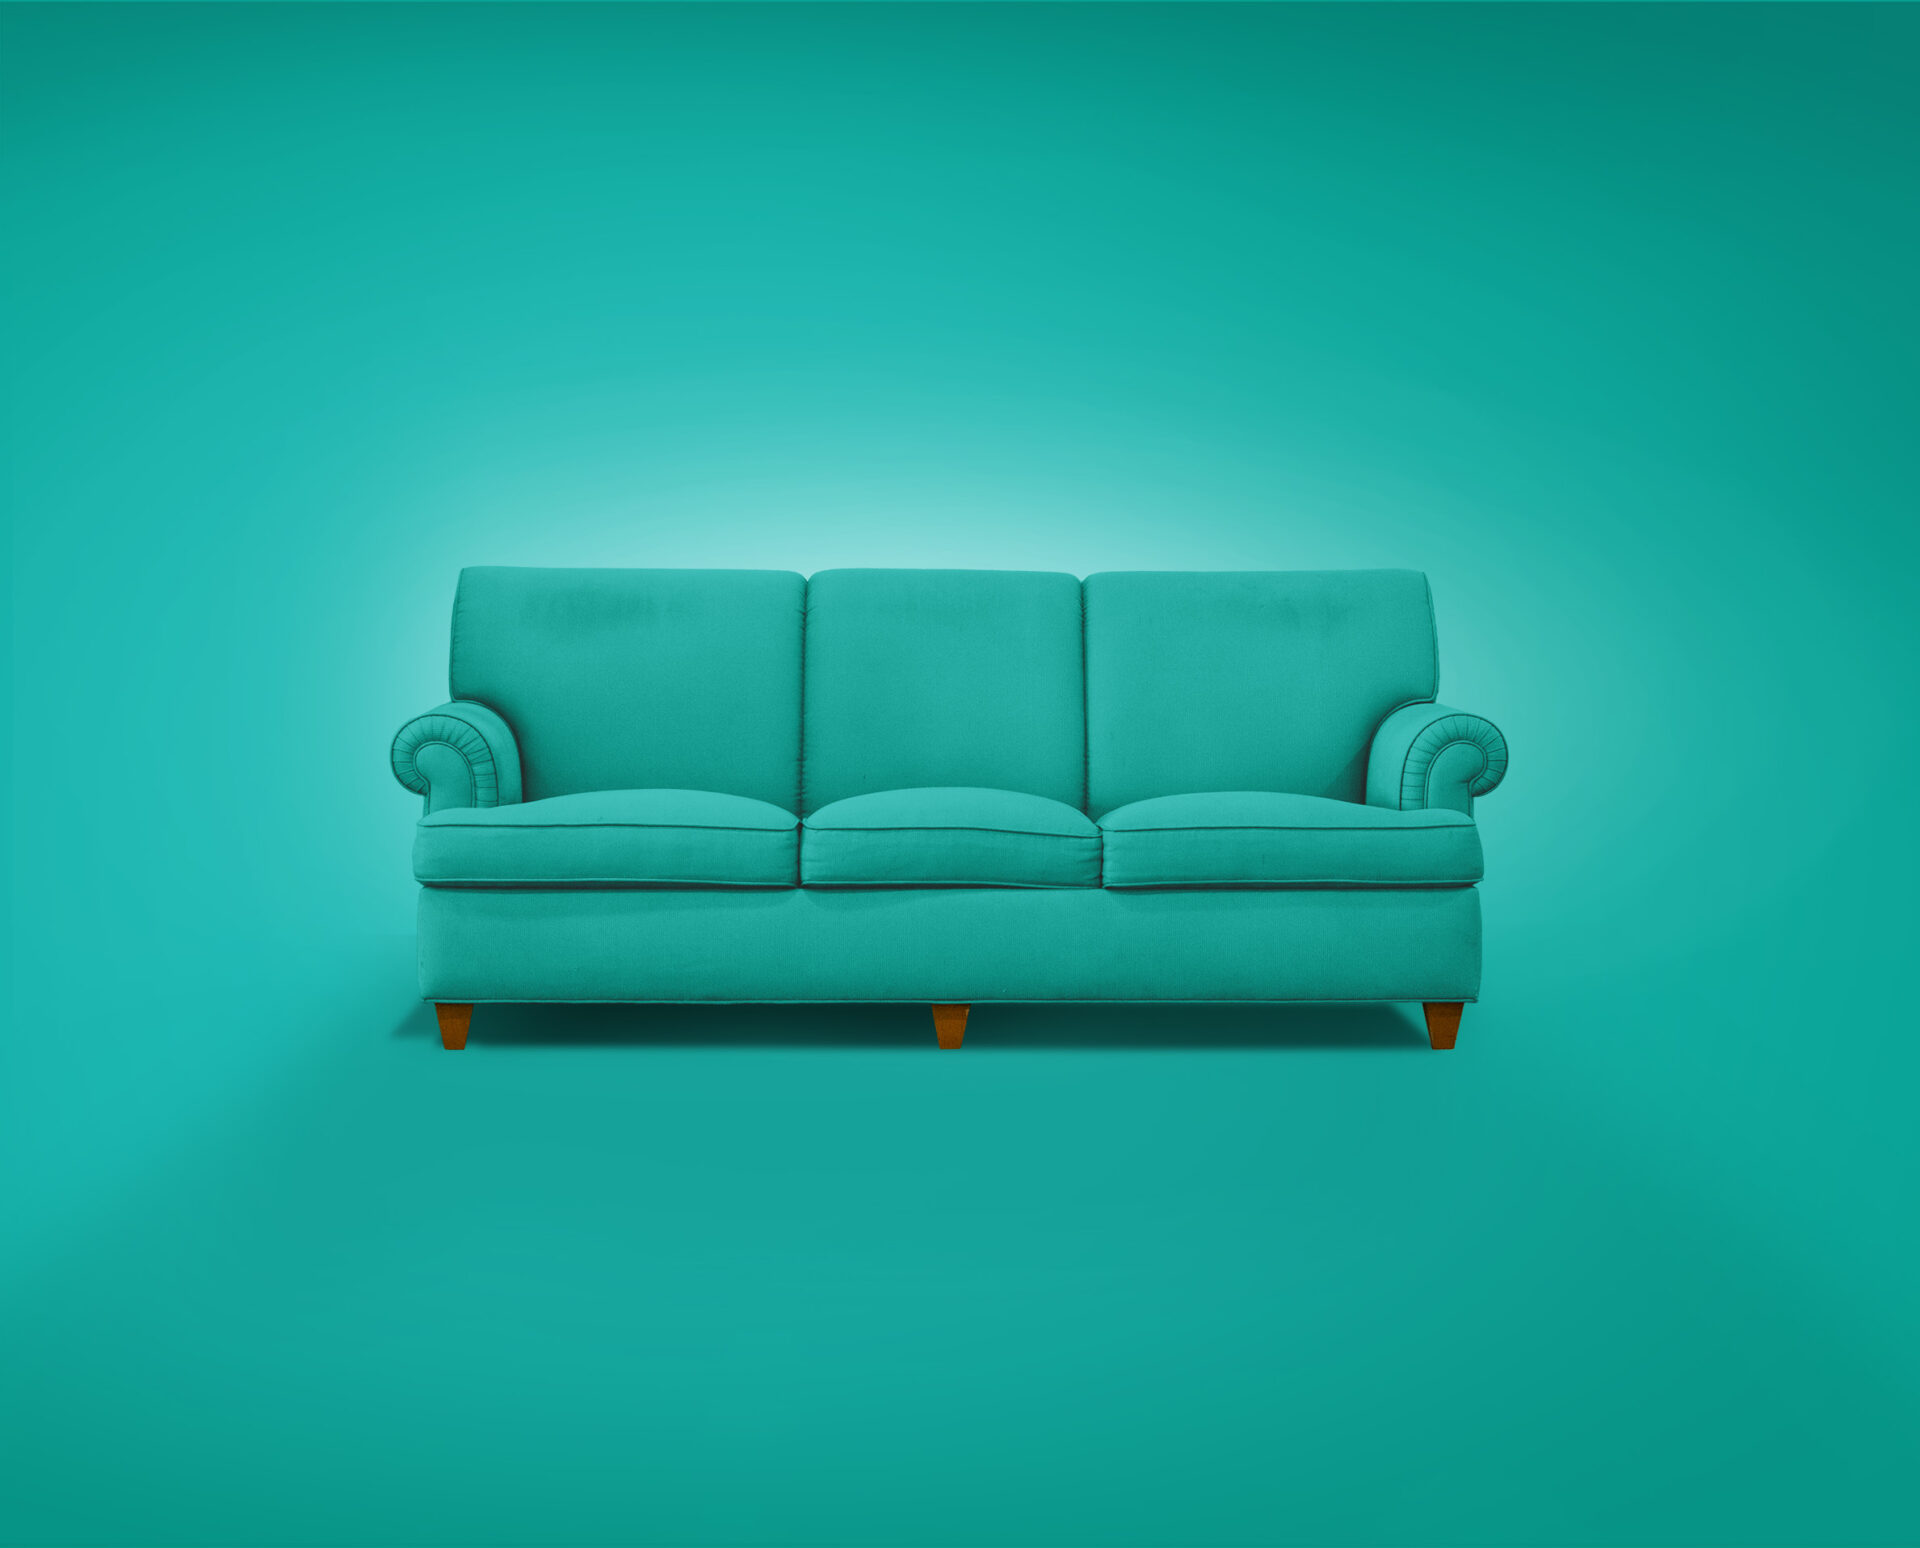 Visual of a couch used in YMCA campaign